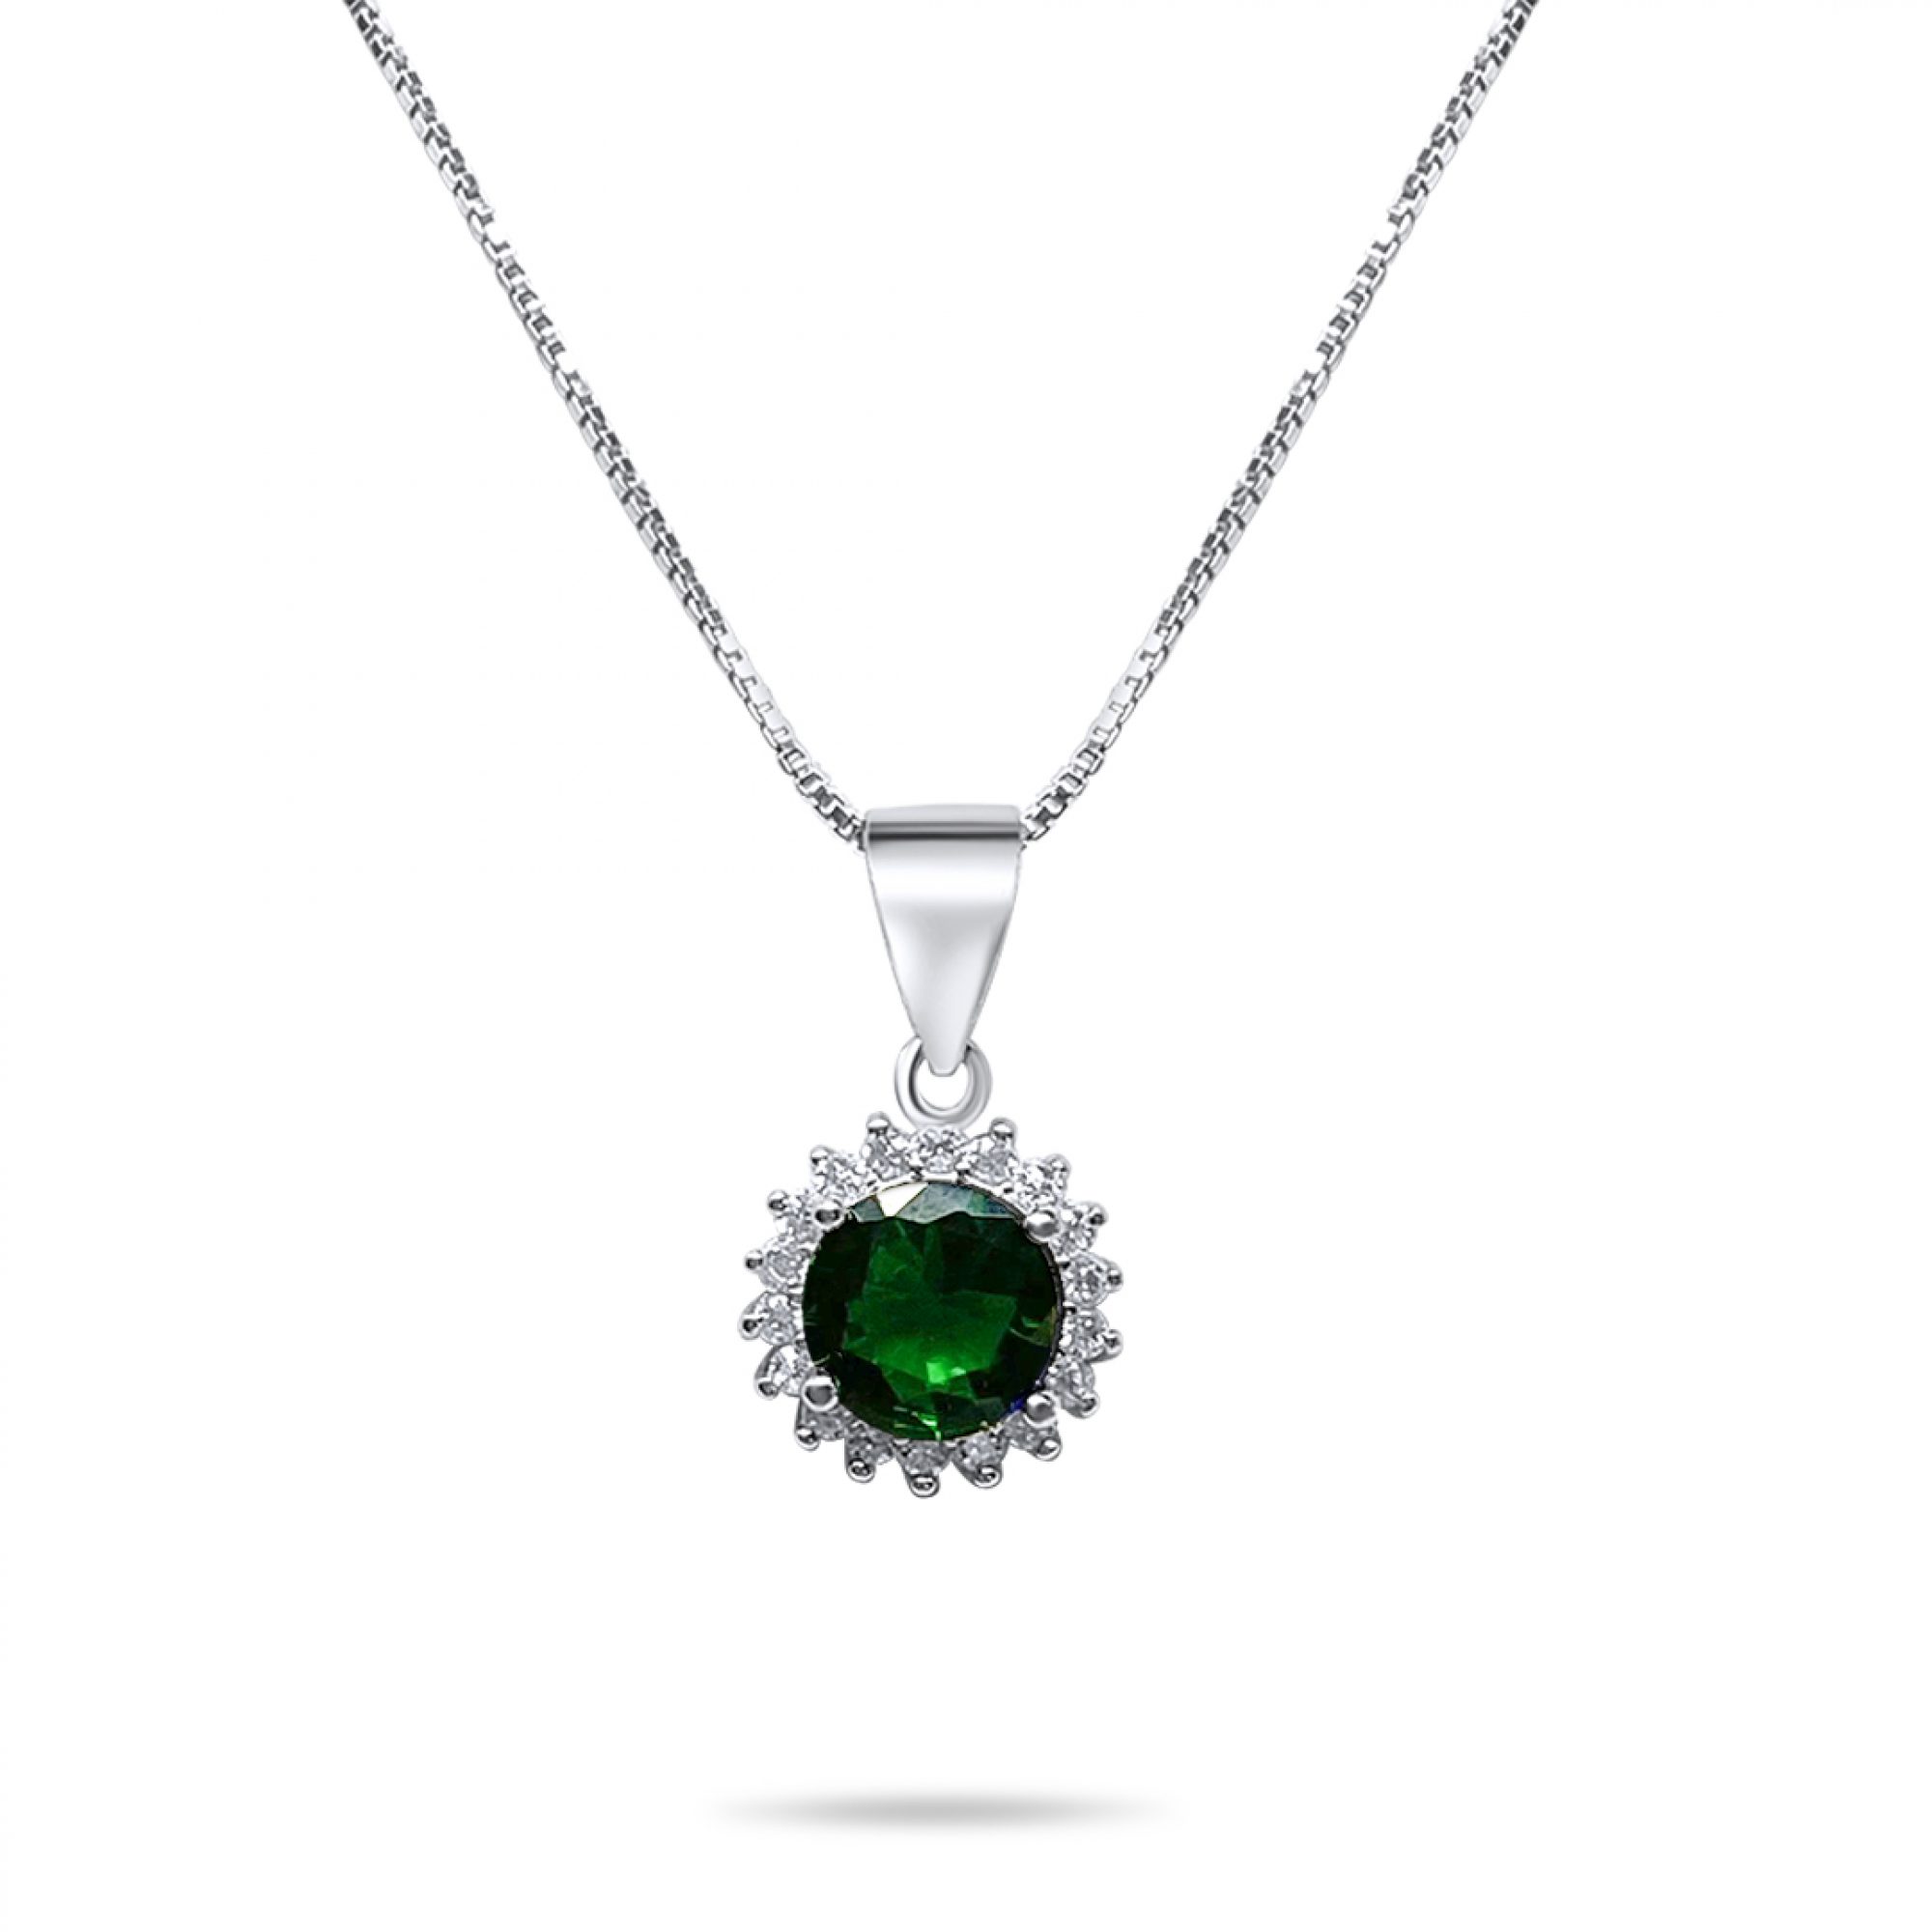 Necklace with emerald and zircon stones